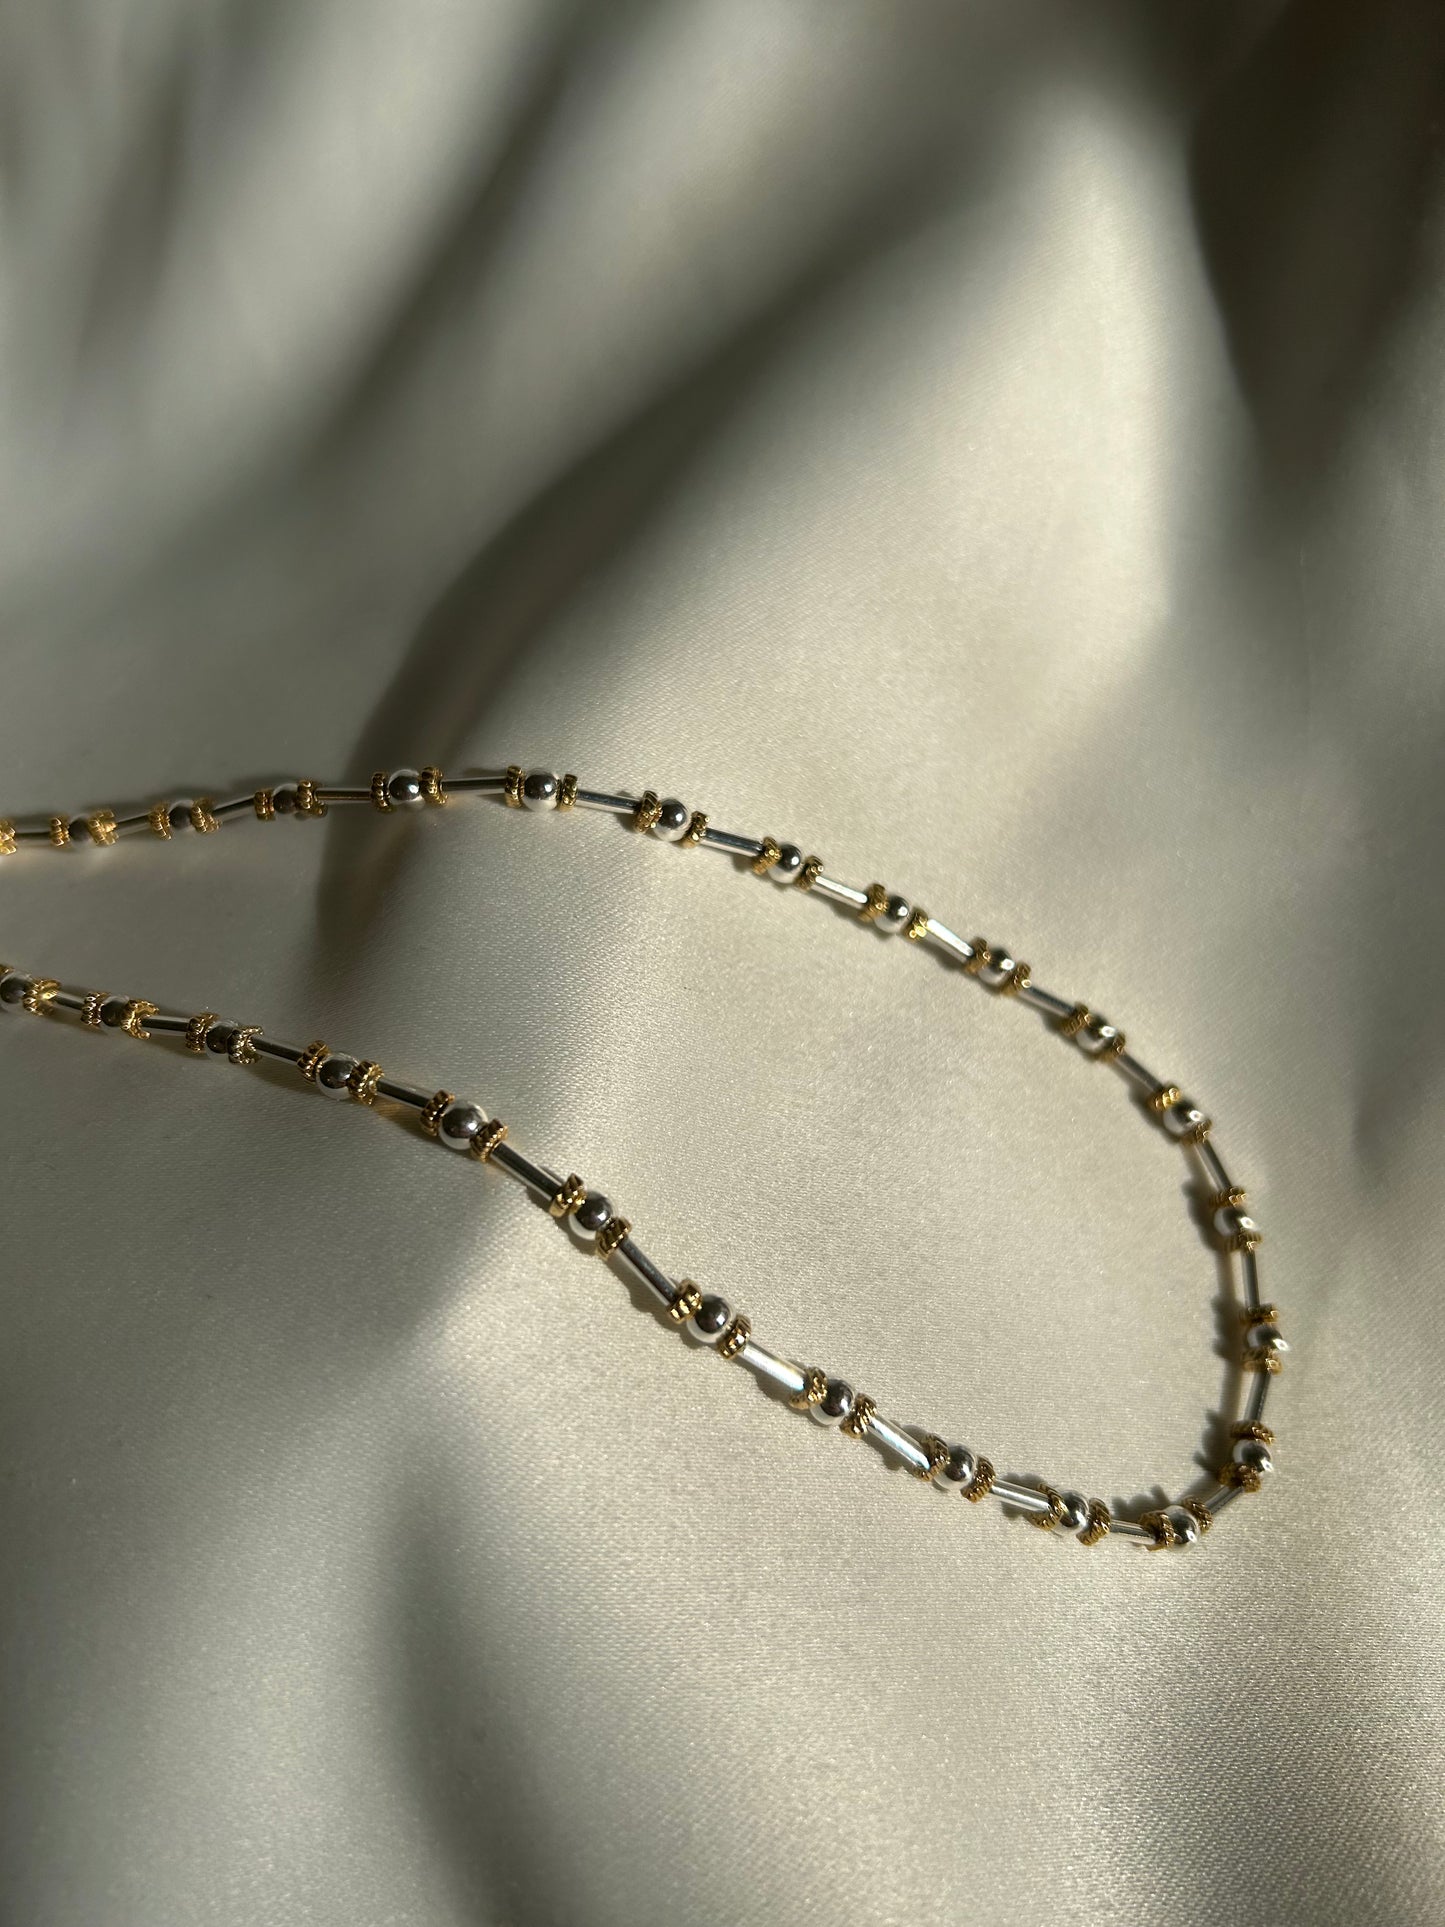 Vintage Bead Chain Necklace